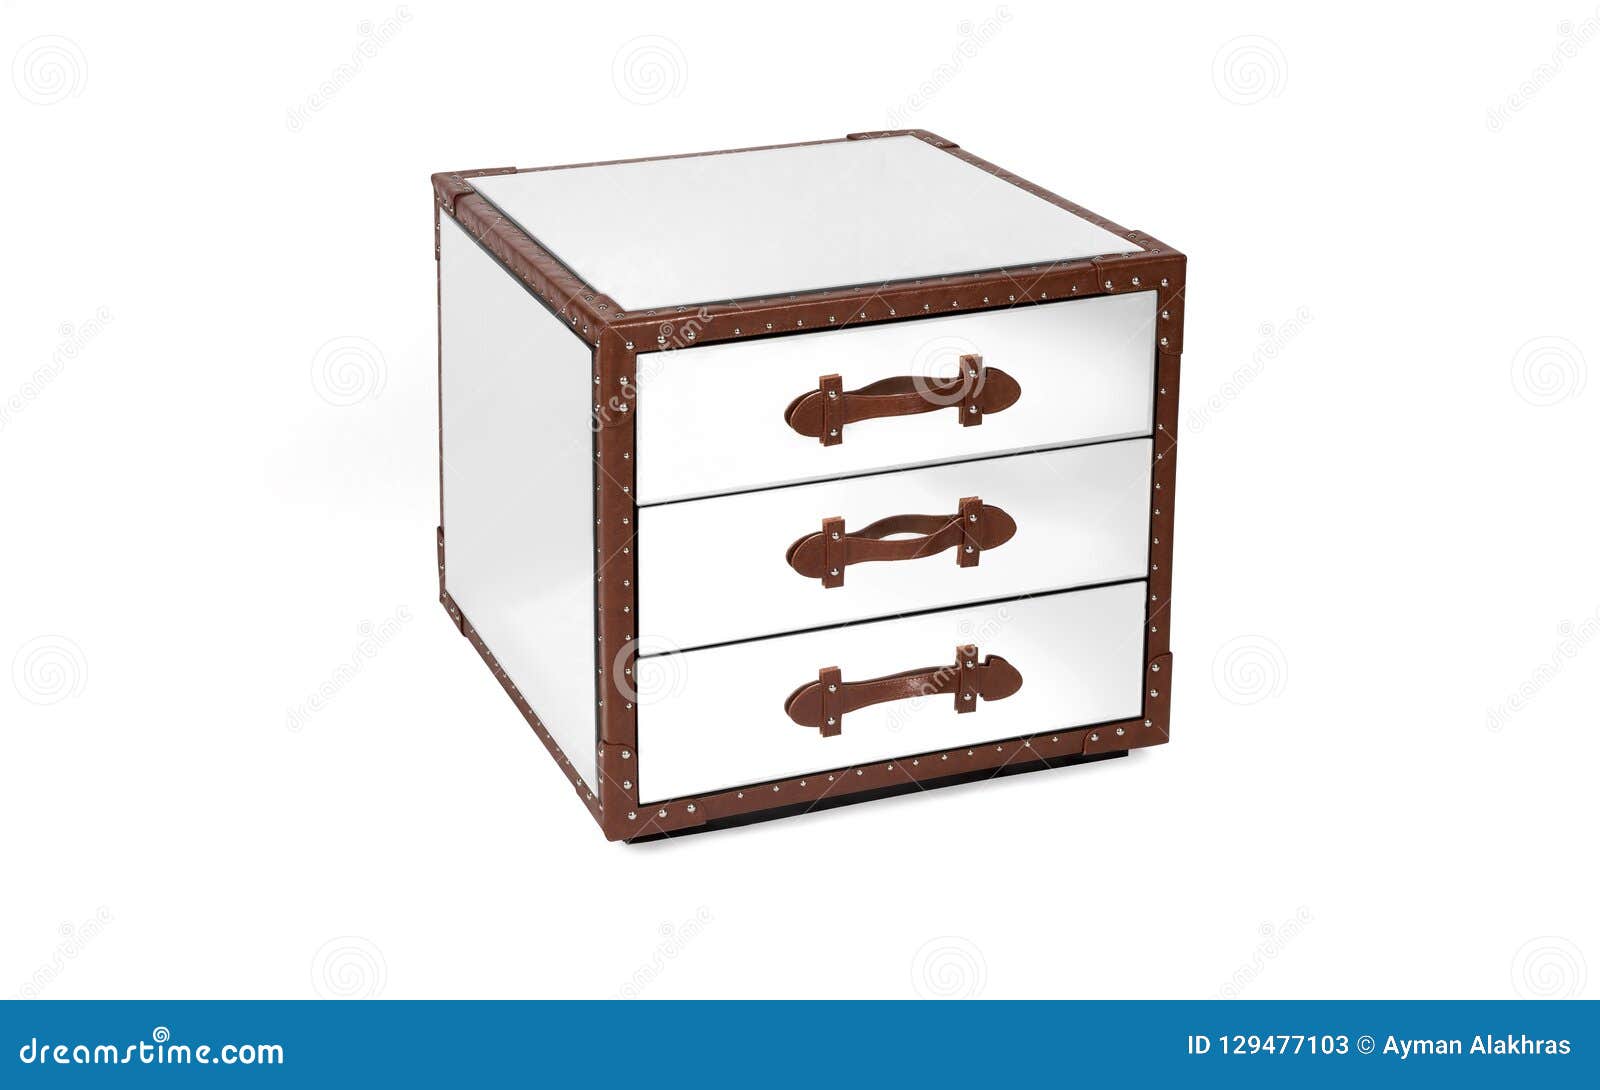 Mirrored Drawers Unit Isolated On White Background Stock Image